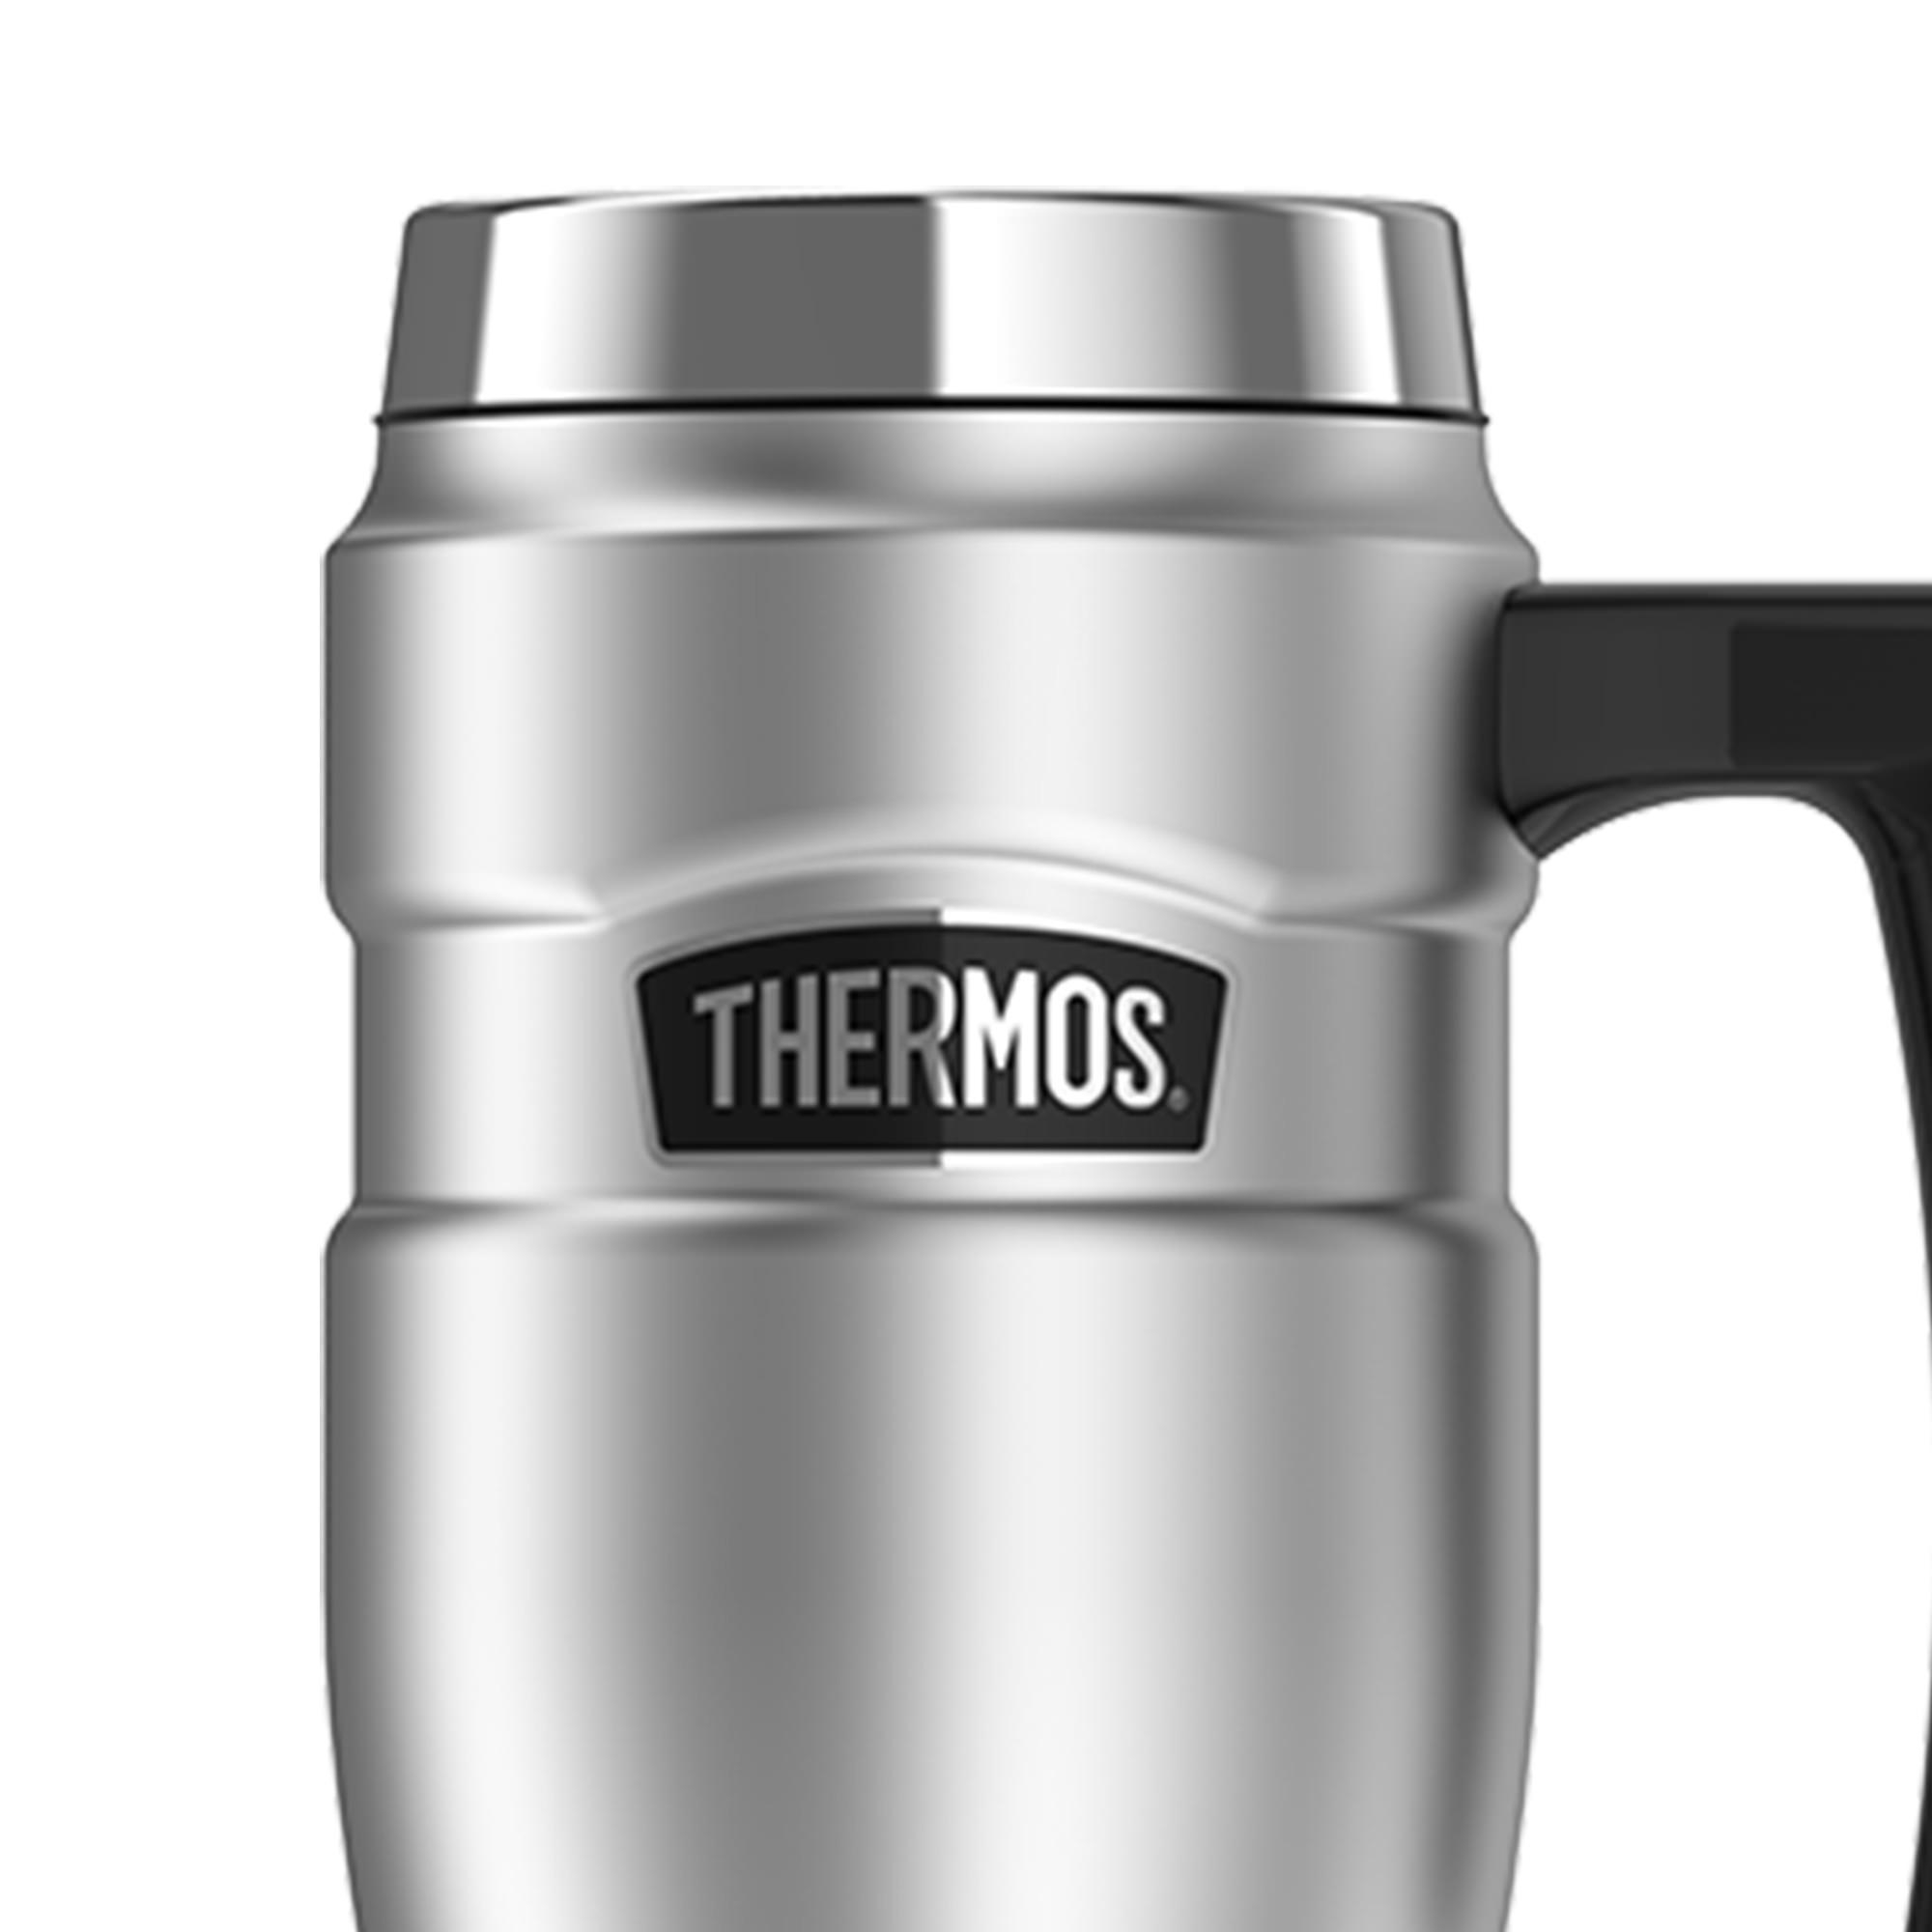 Thermos Stainless King Insulated Travel Mug 470ml Stainless Steel Image 2